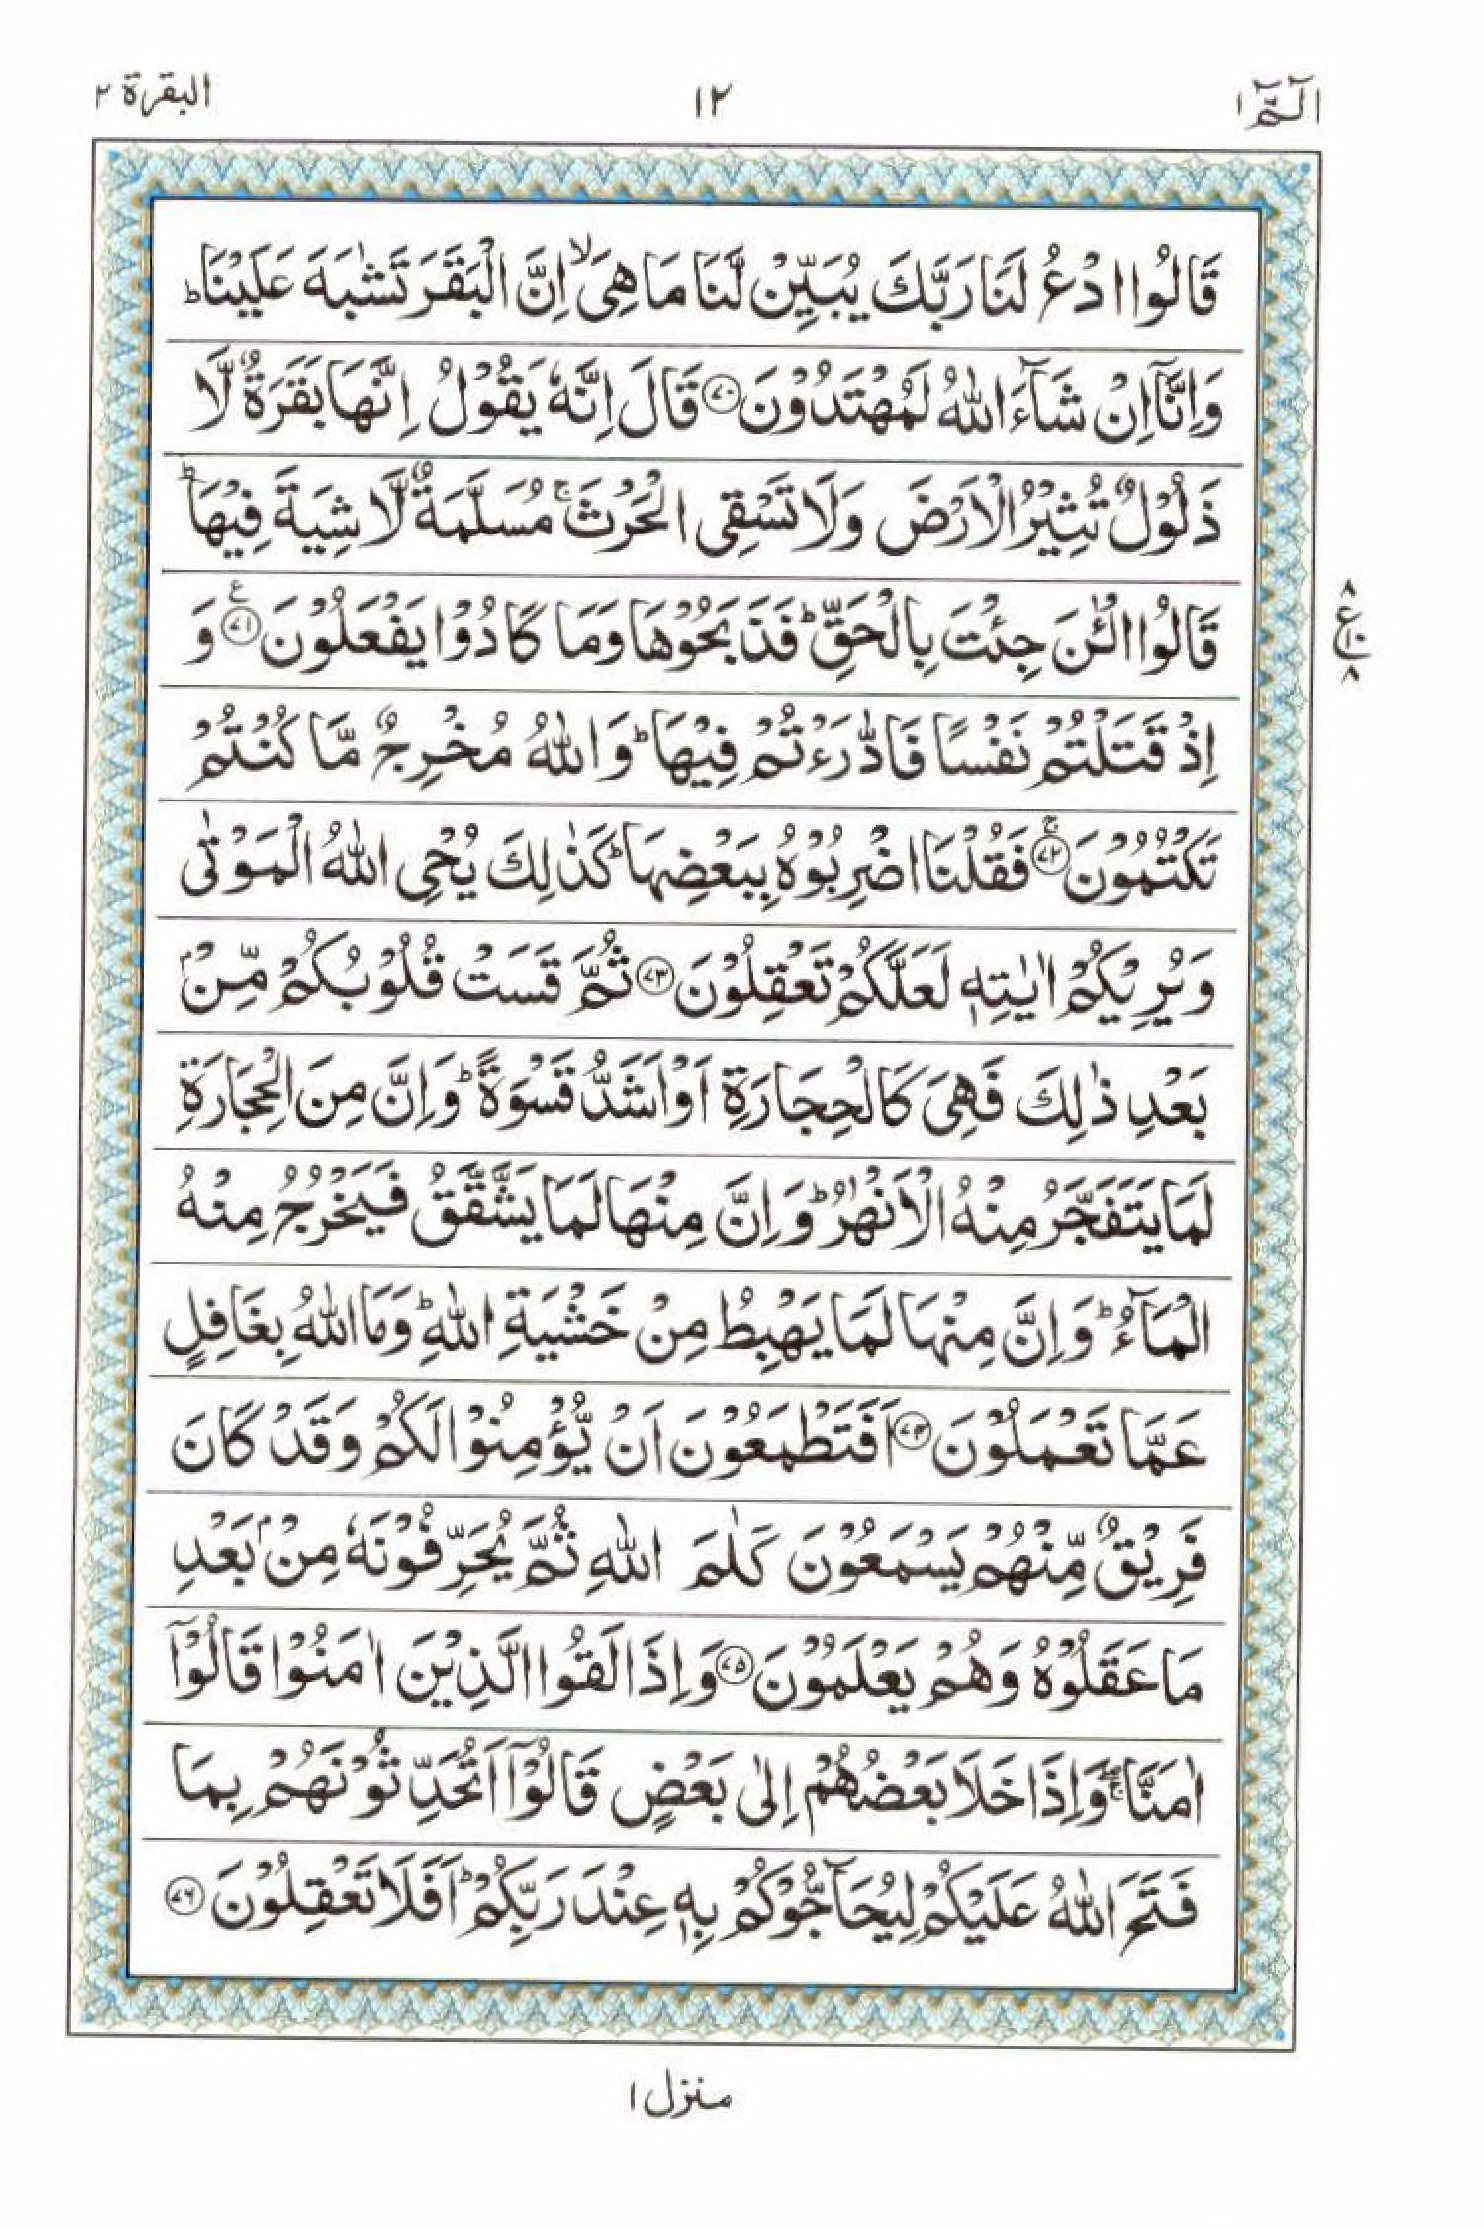 Read 15 Lines Quran, Part / Chapter / Siparah 1 Page 12